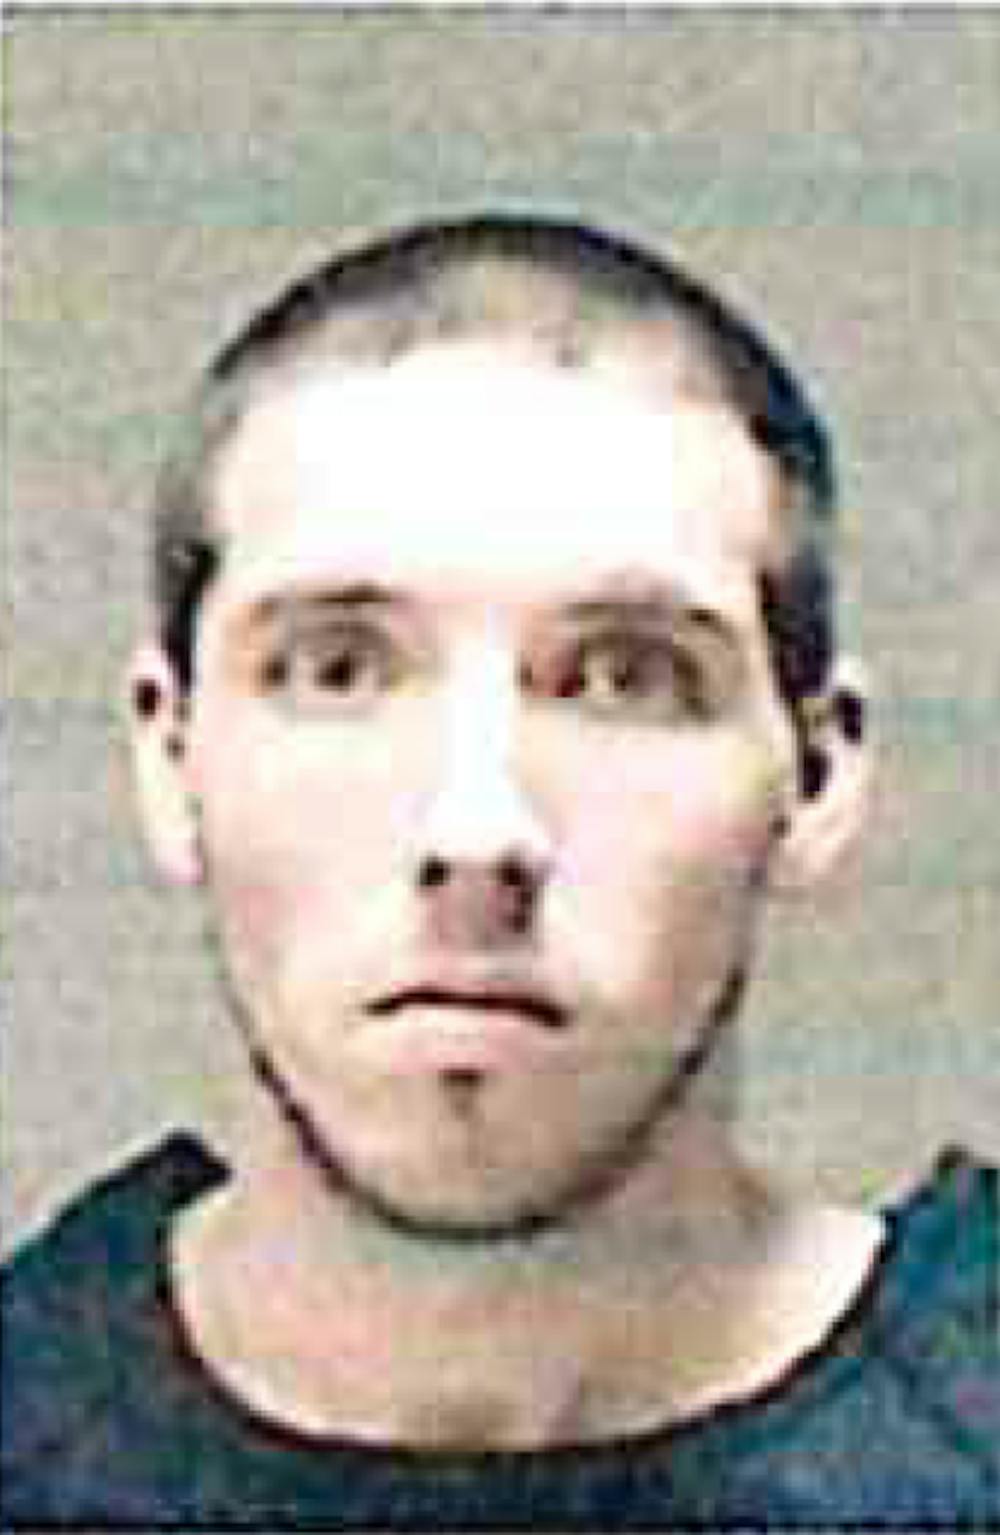 Muncie man allegedly strangled, threatened to kill the mother of his child